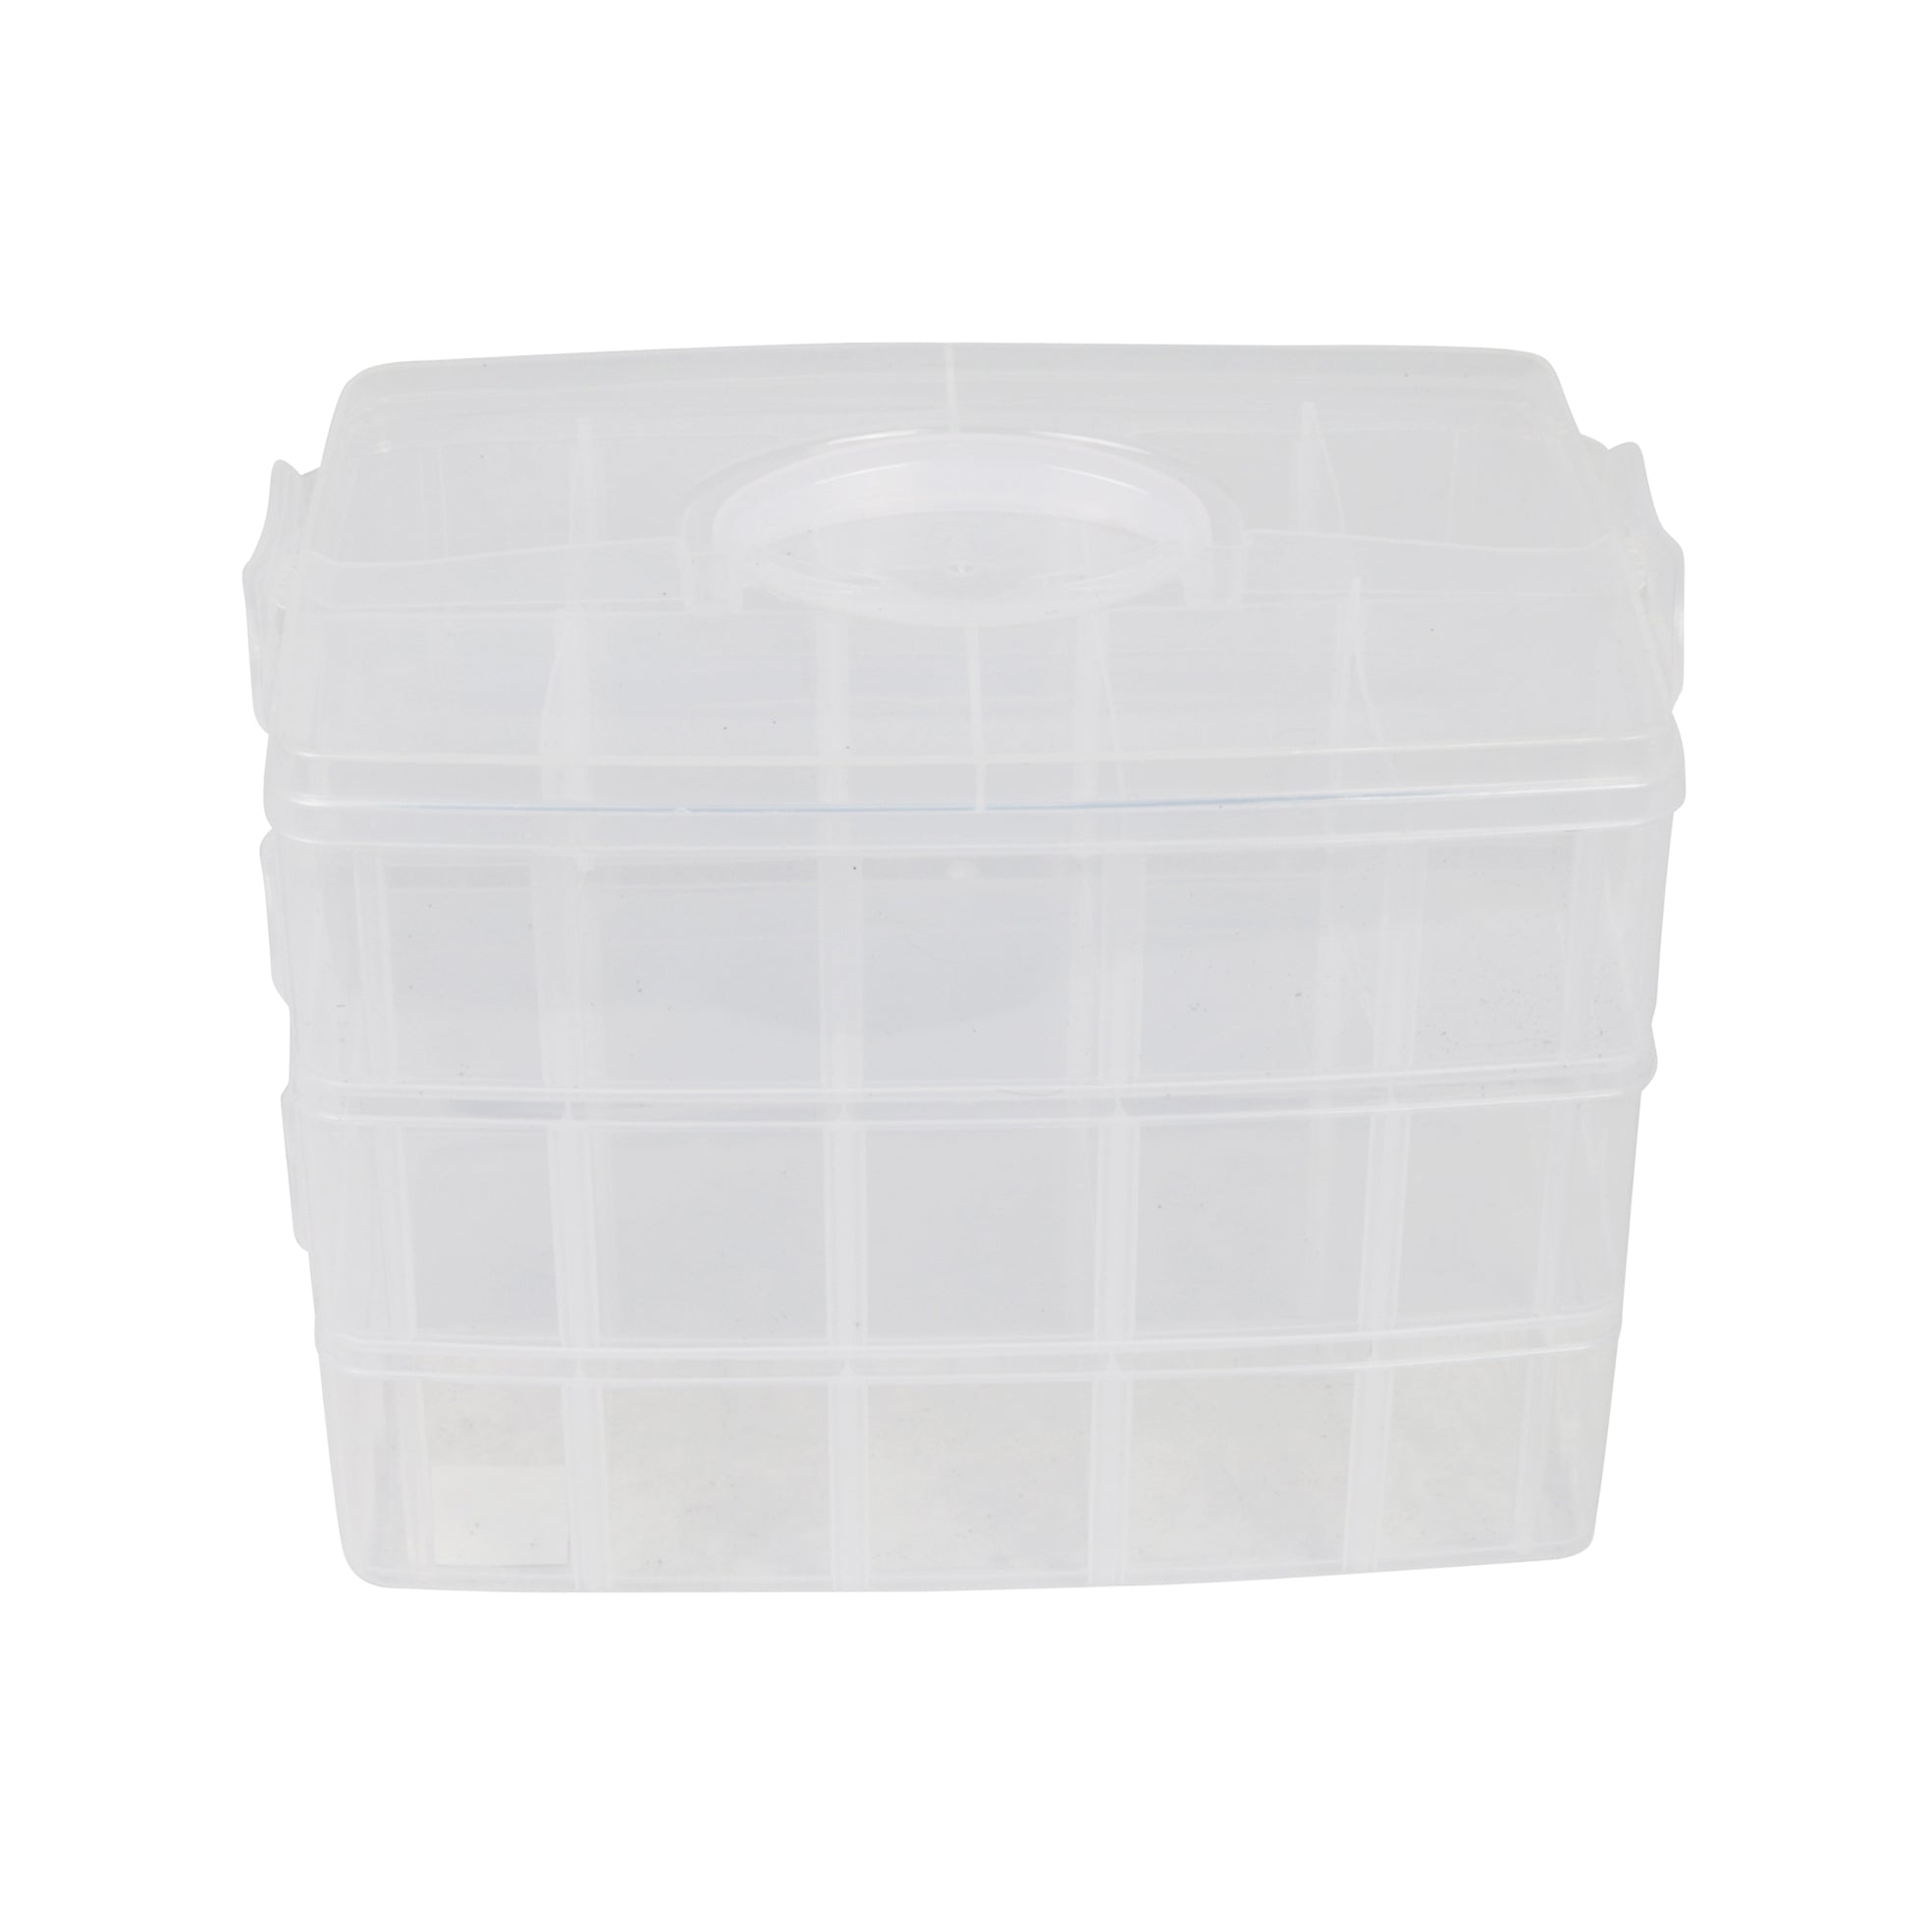 Household Double-layer Multi-compartment Transparent Storage Box